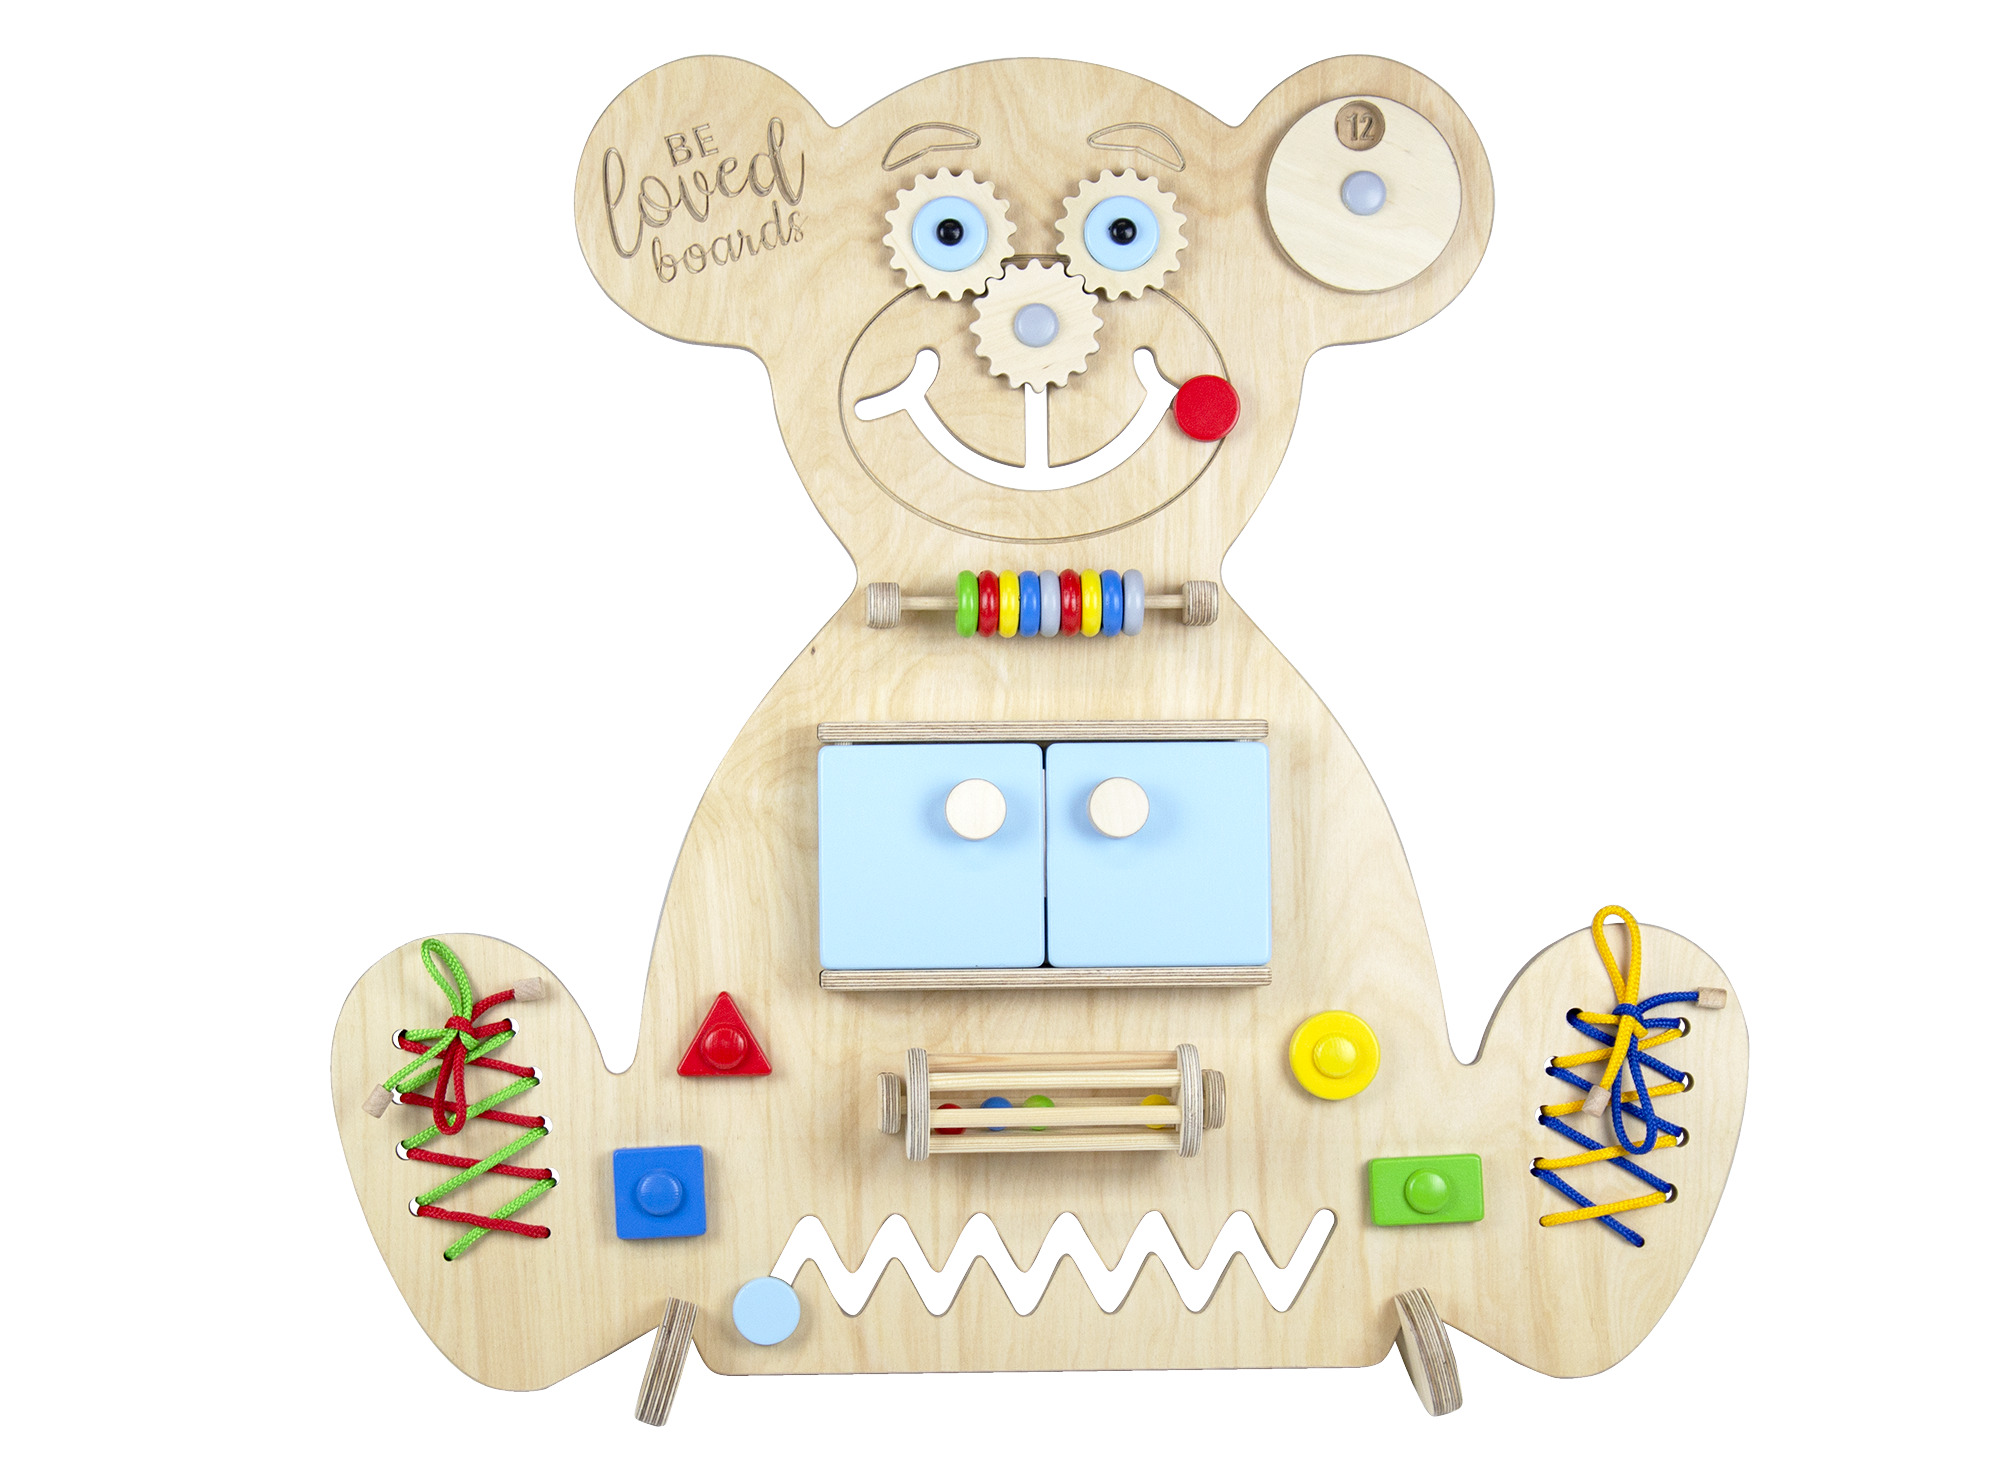 1. Educational wooden busy board Bear Beloved boards blue front view